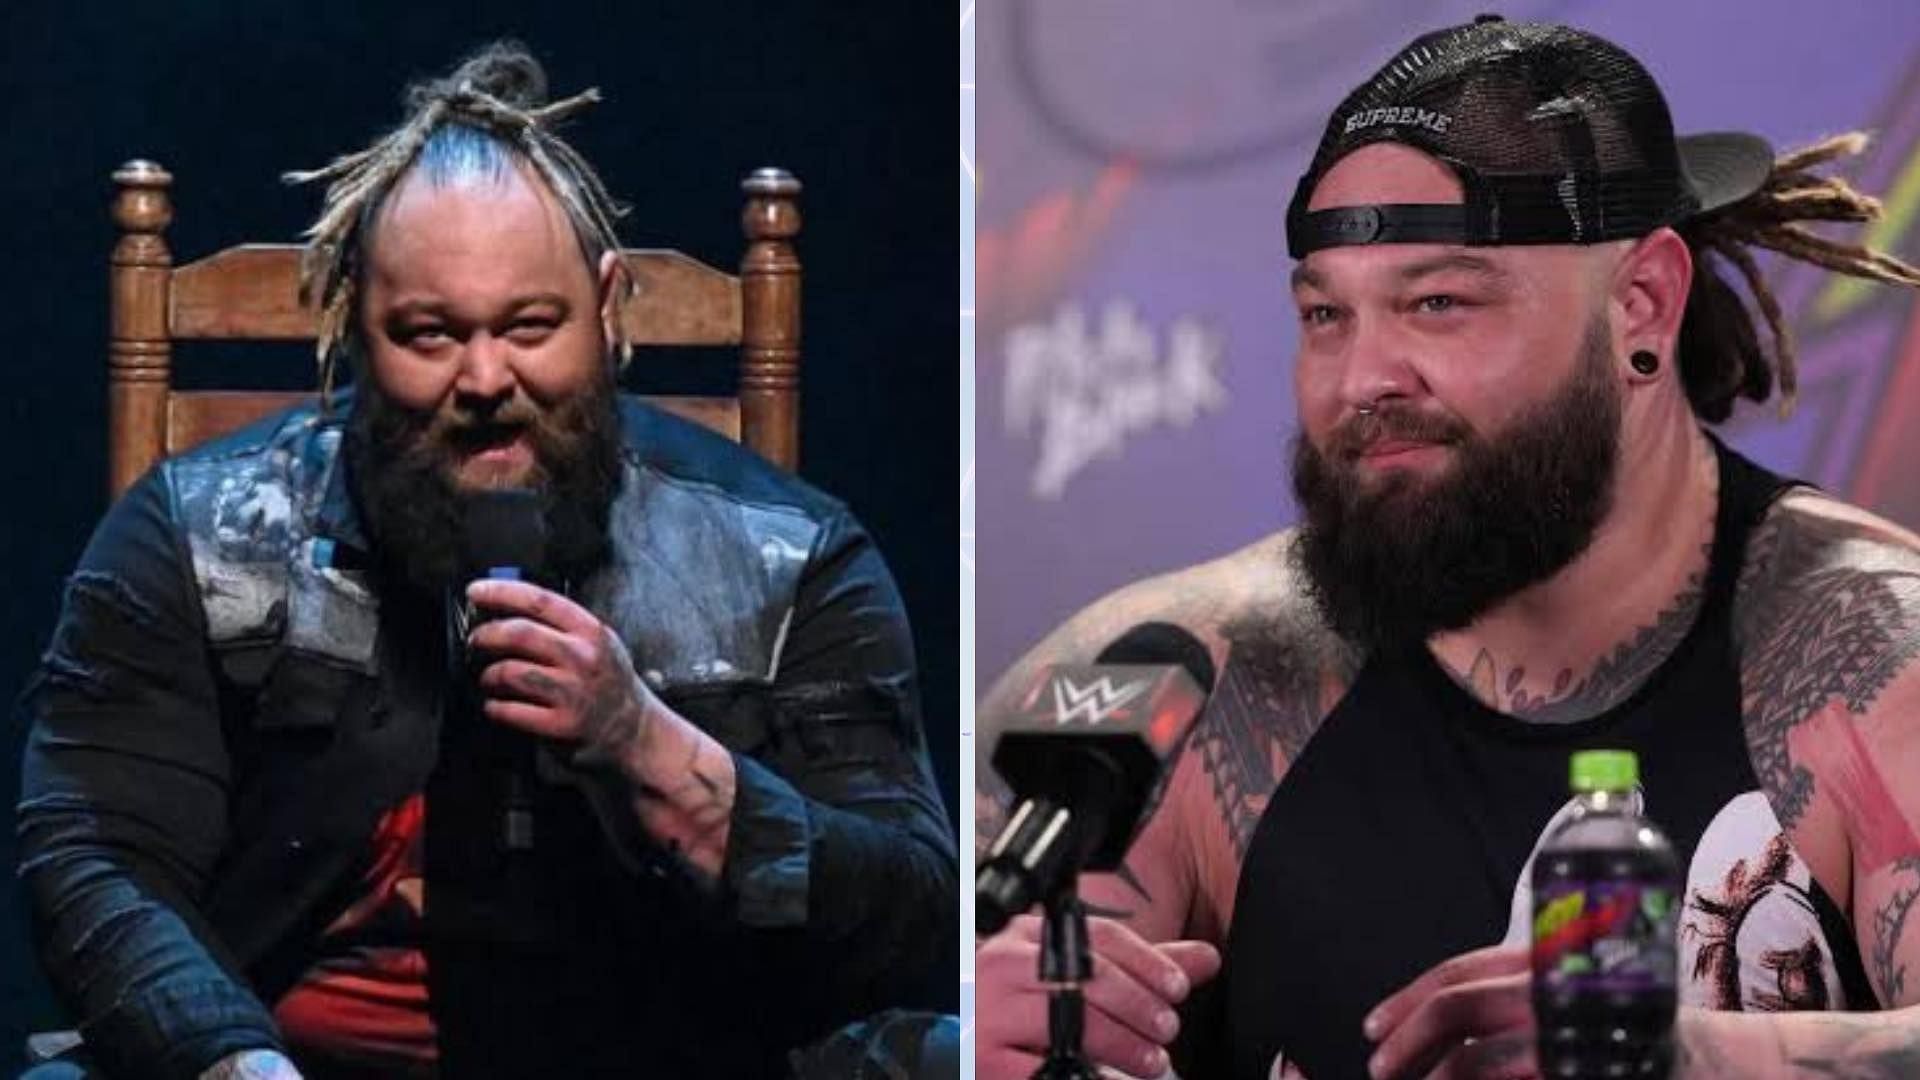 Bray Wyatt has become one of the greatest storytellers in WWE